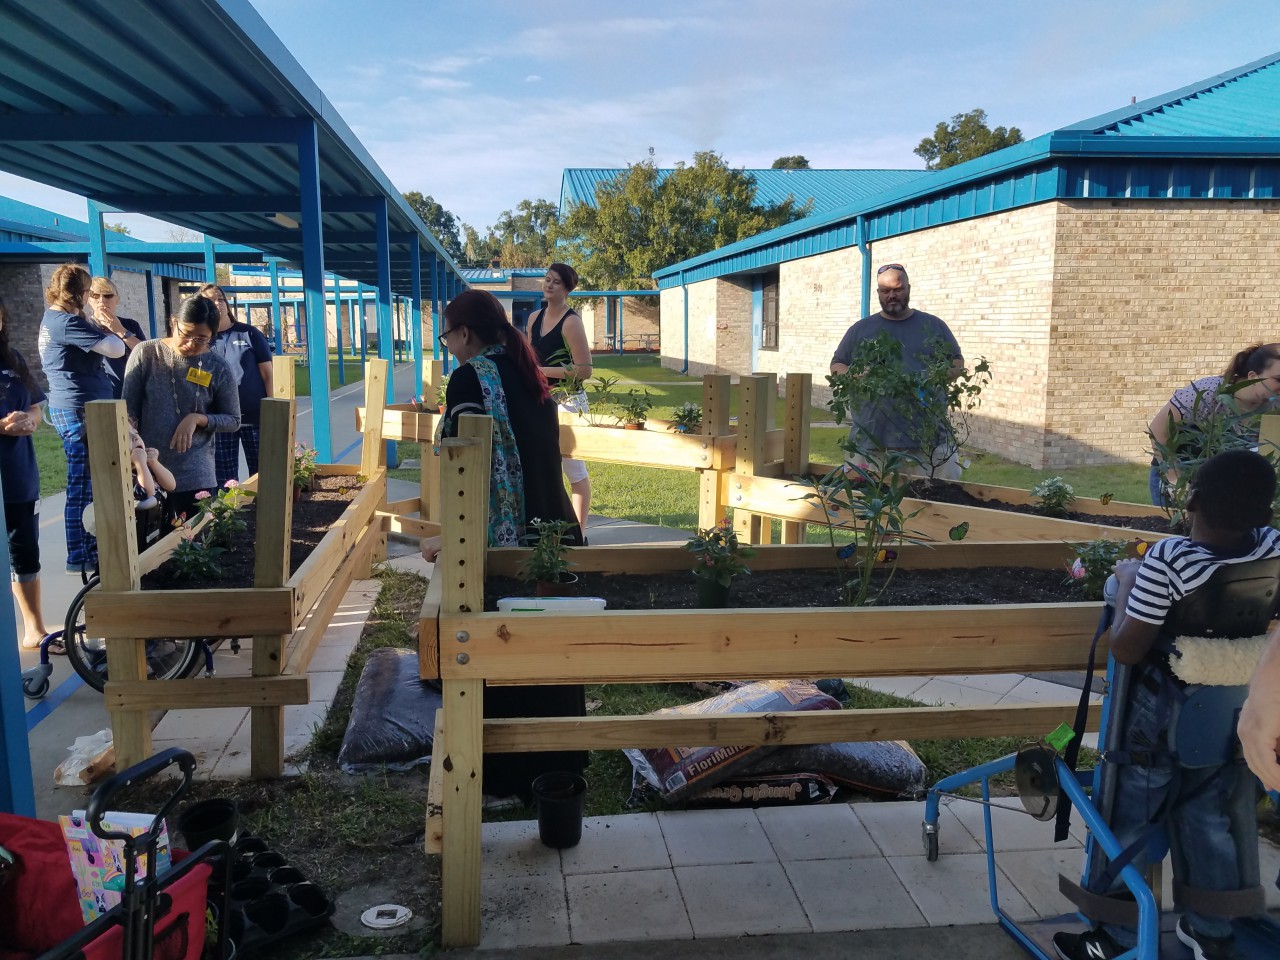 Raised flower beds at an elementary school, several adults waiting to assist children with special need in planting flowers